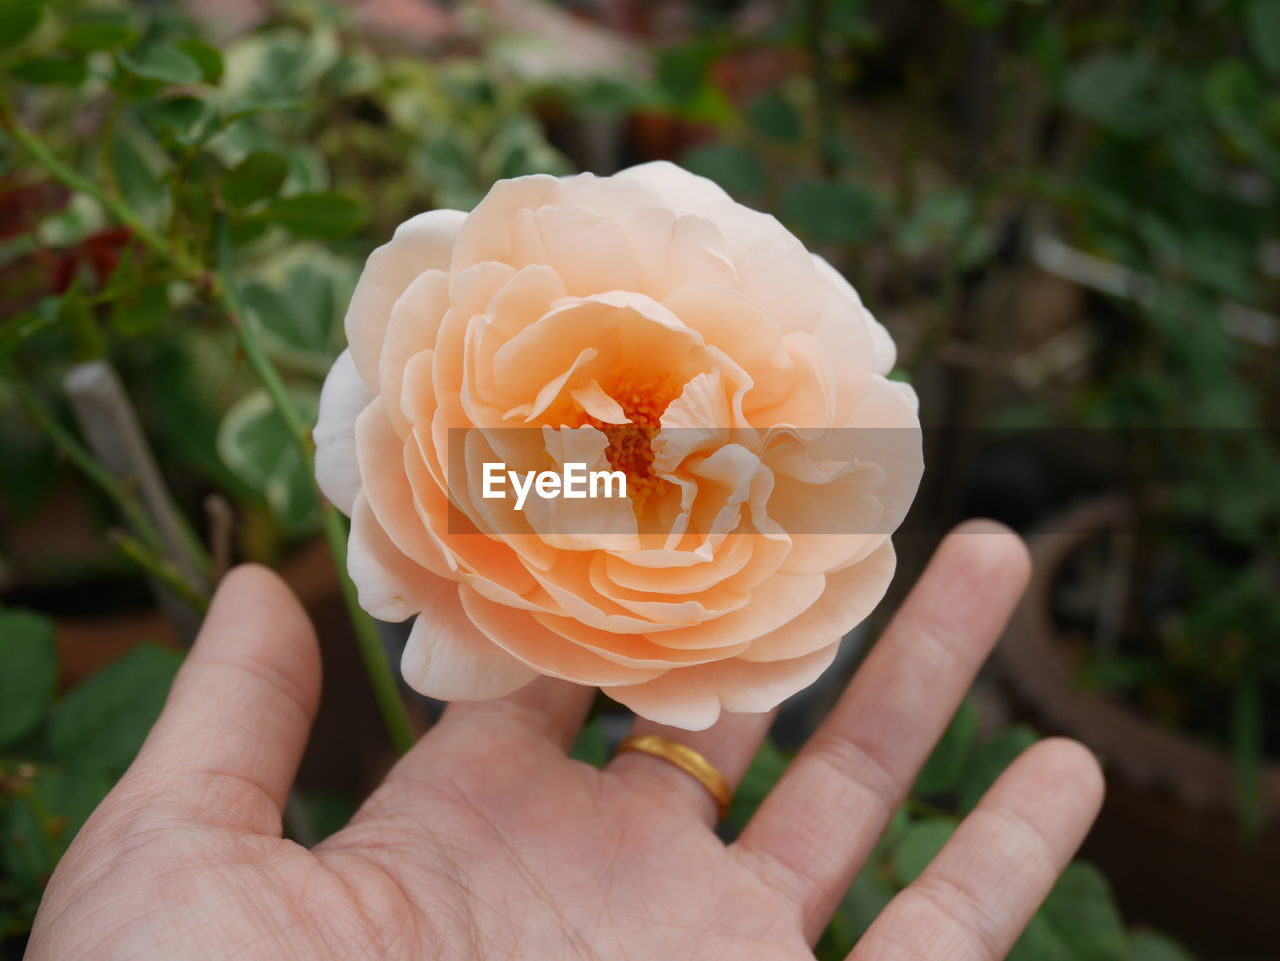 CLOSE-UP OF HAND HOLDING ROSE FLOWER IN BLOOM